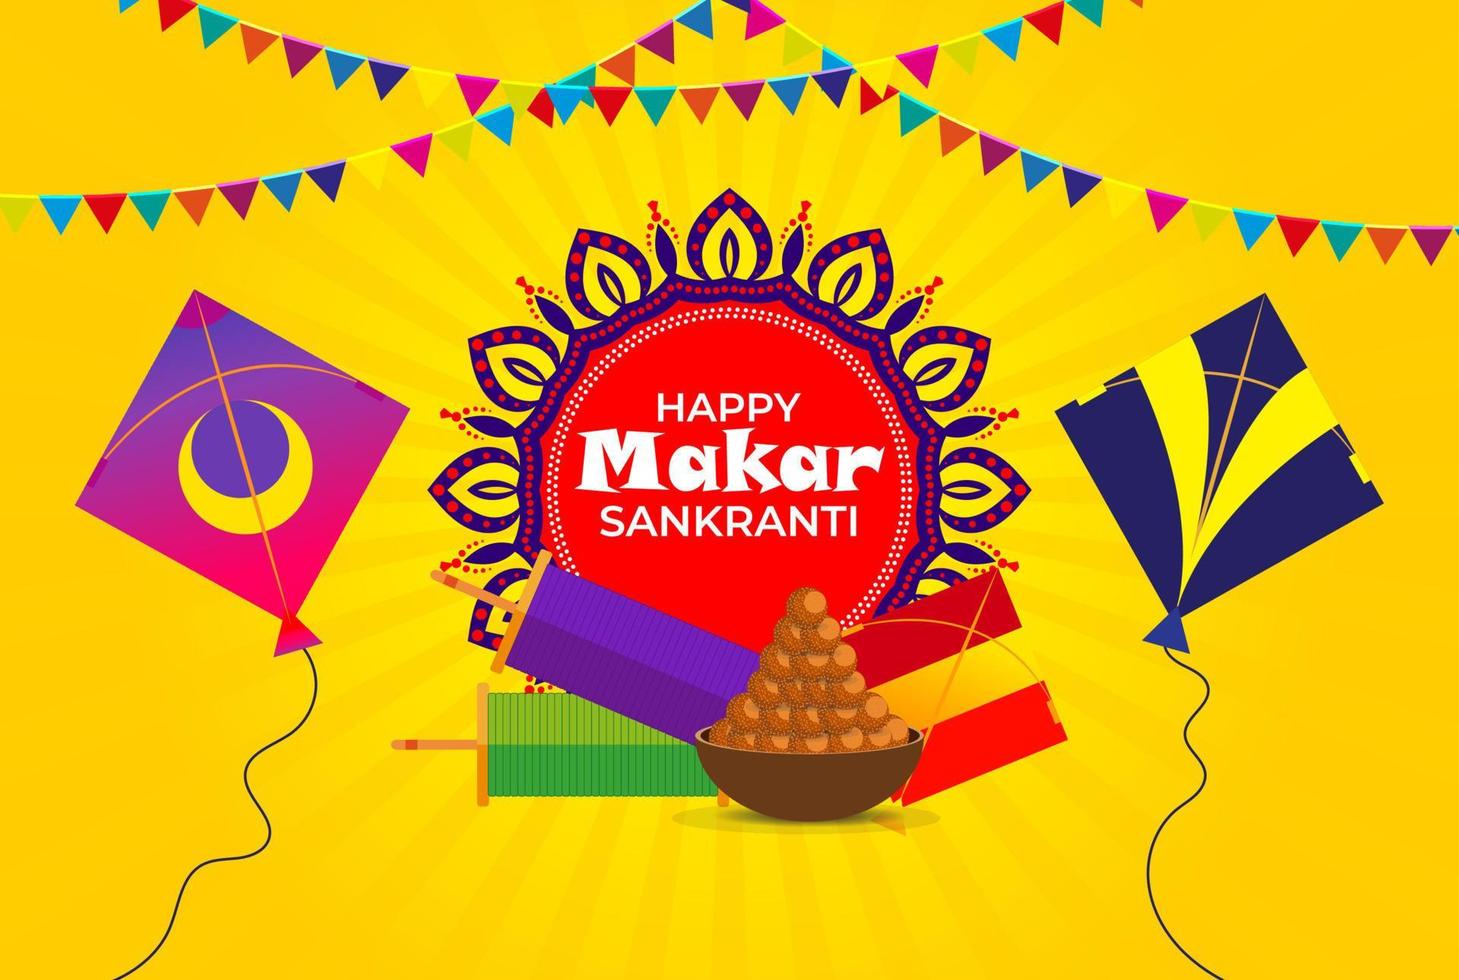 Happy makar sankranti yellow background with kites, laddoo and spool of string vector